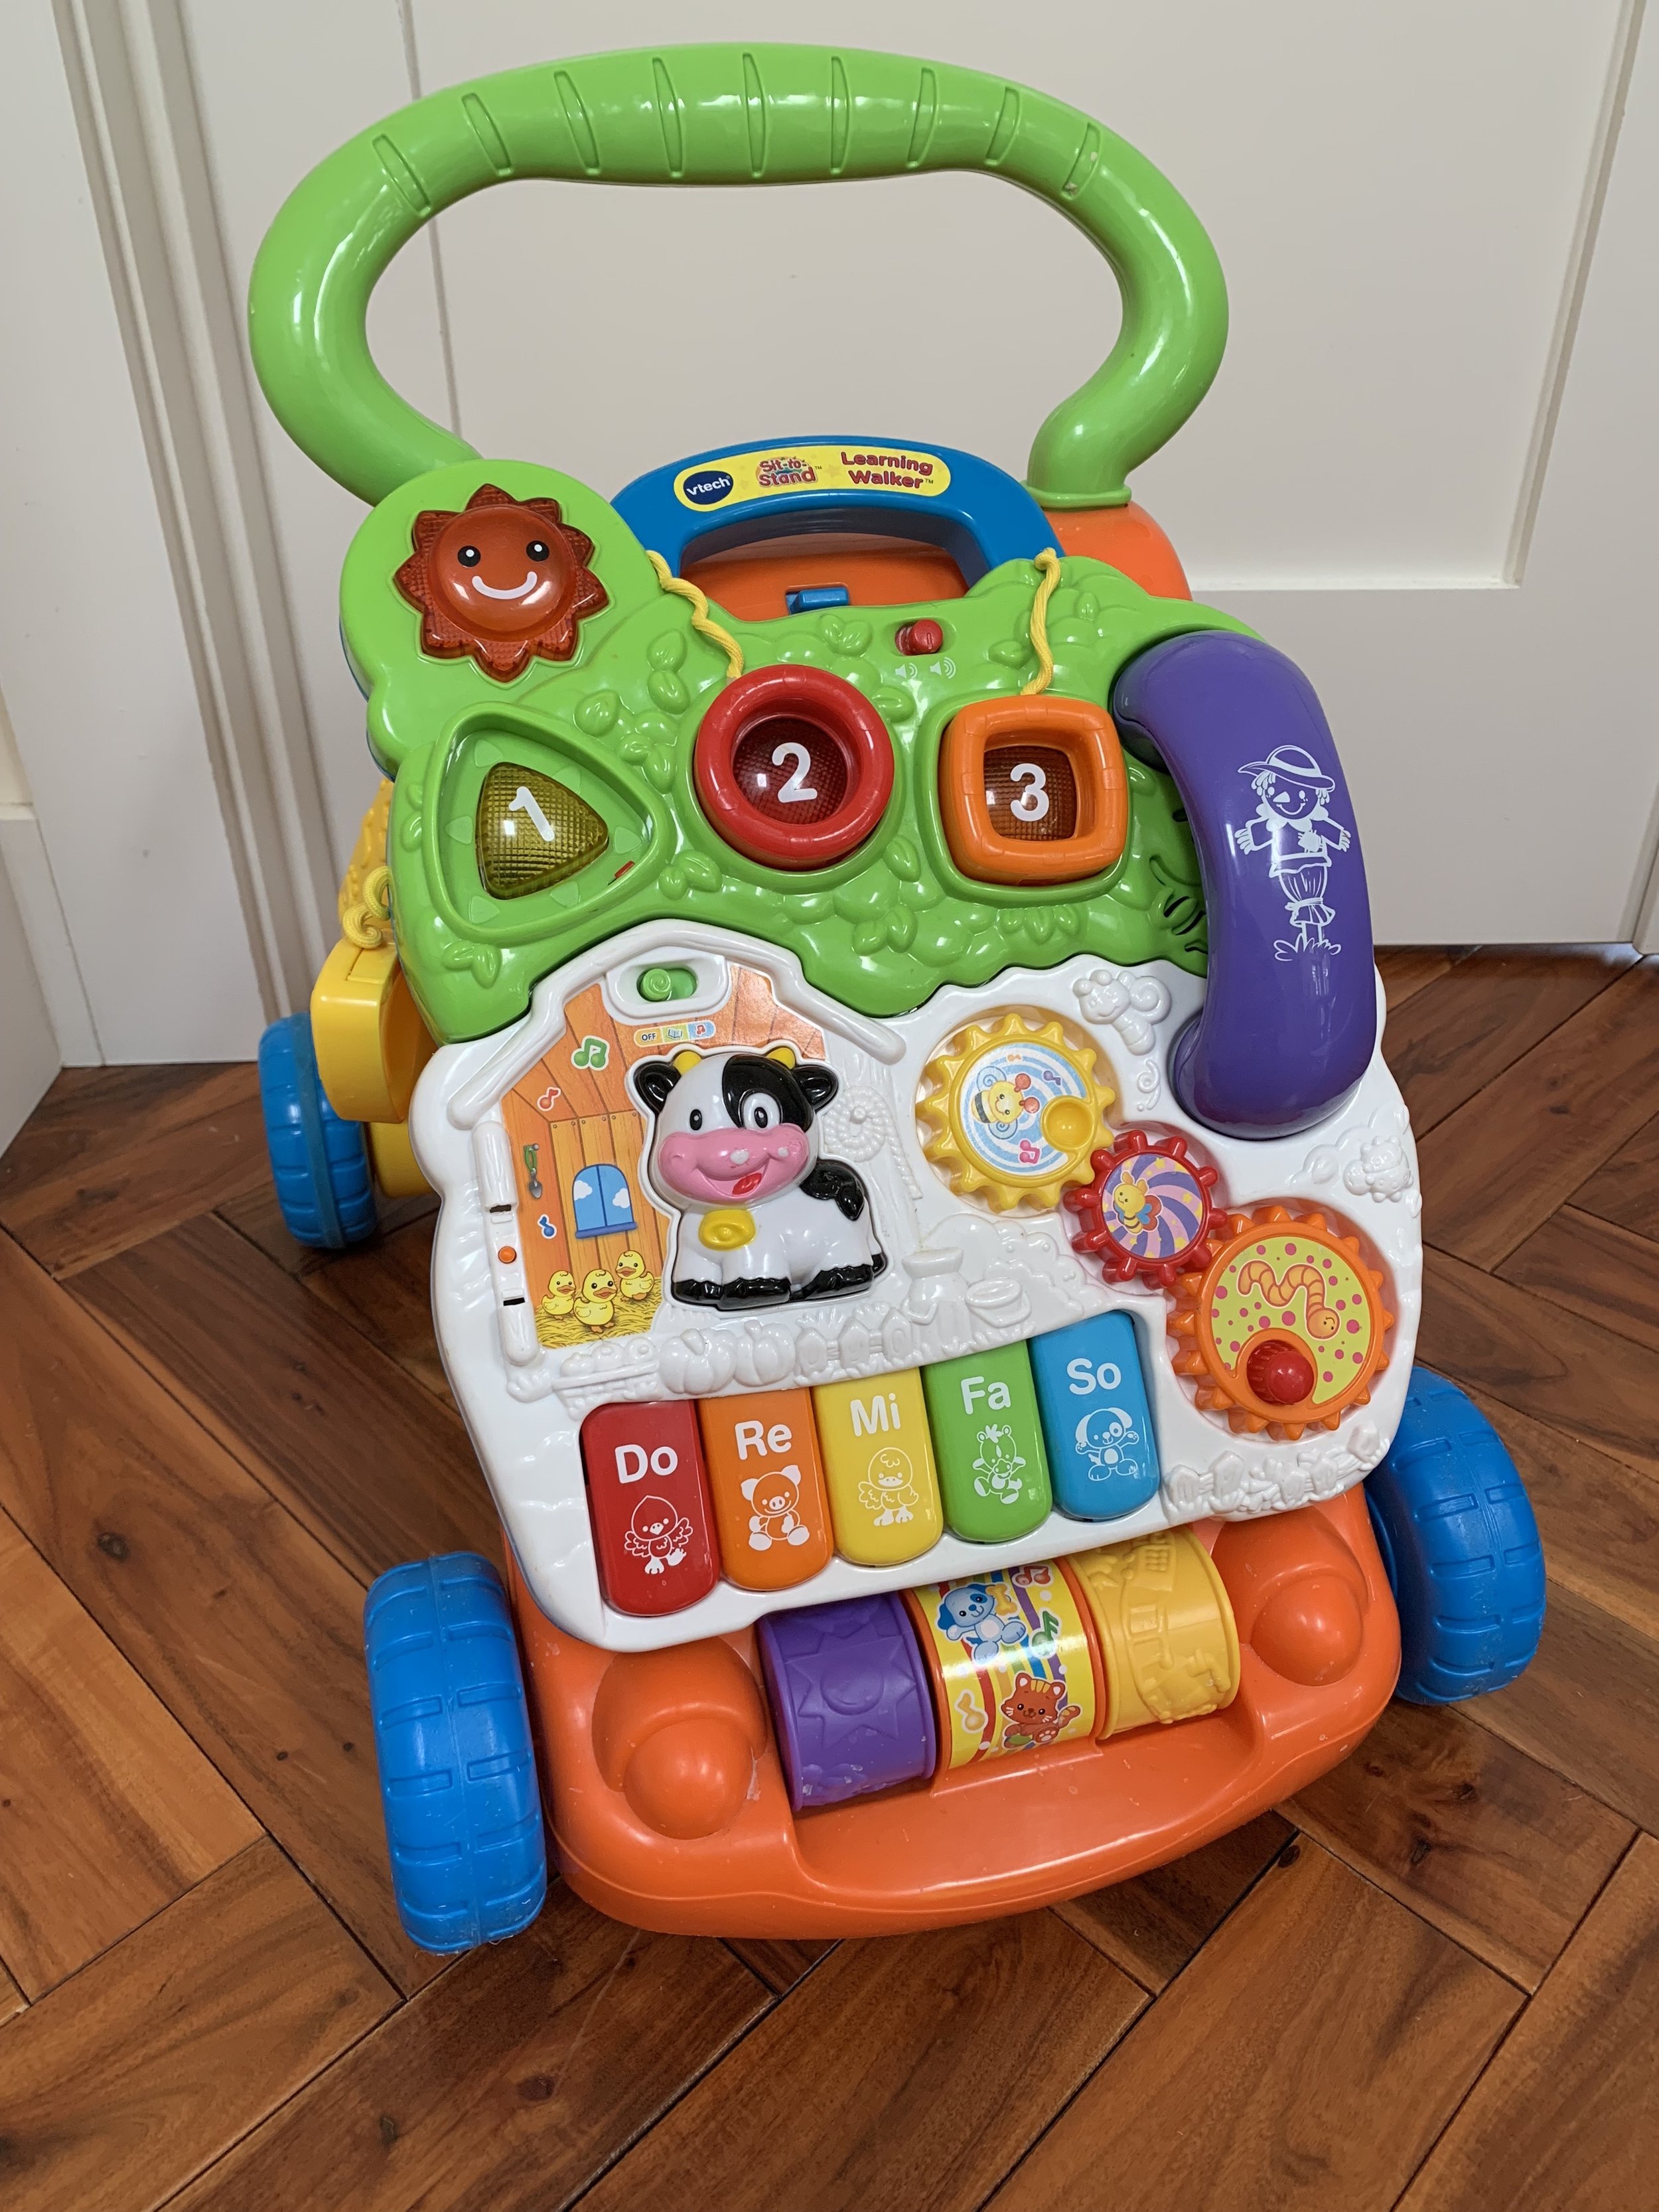 vtech sit and stand walker